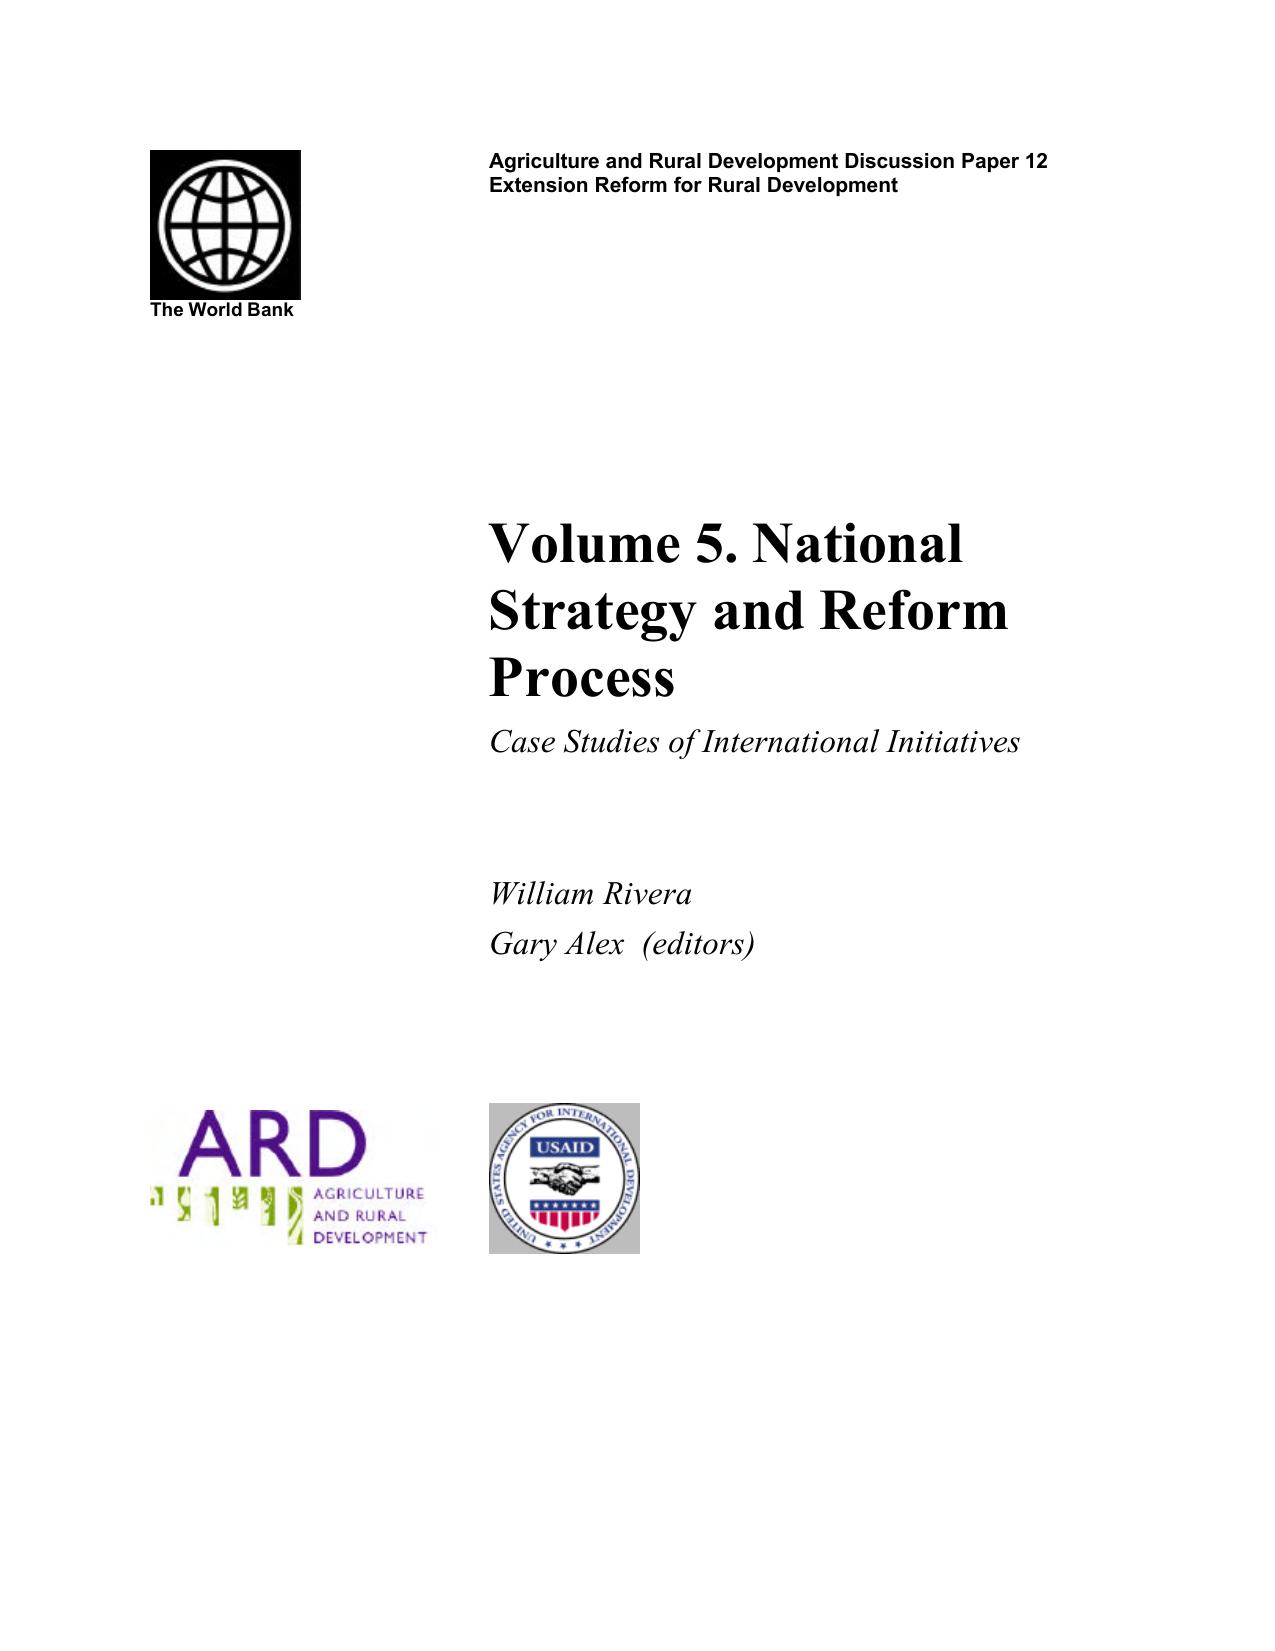 National Strategy and Reform Process 2004